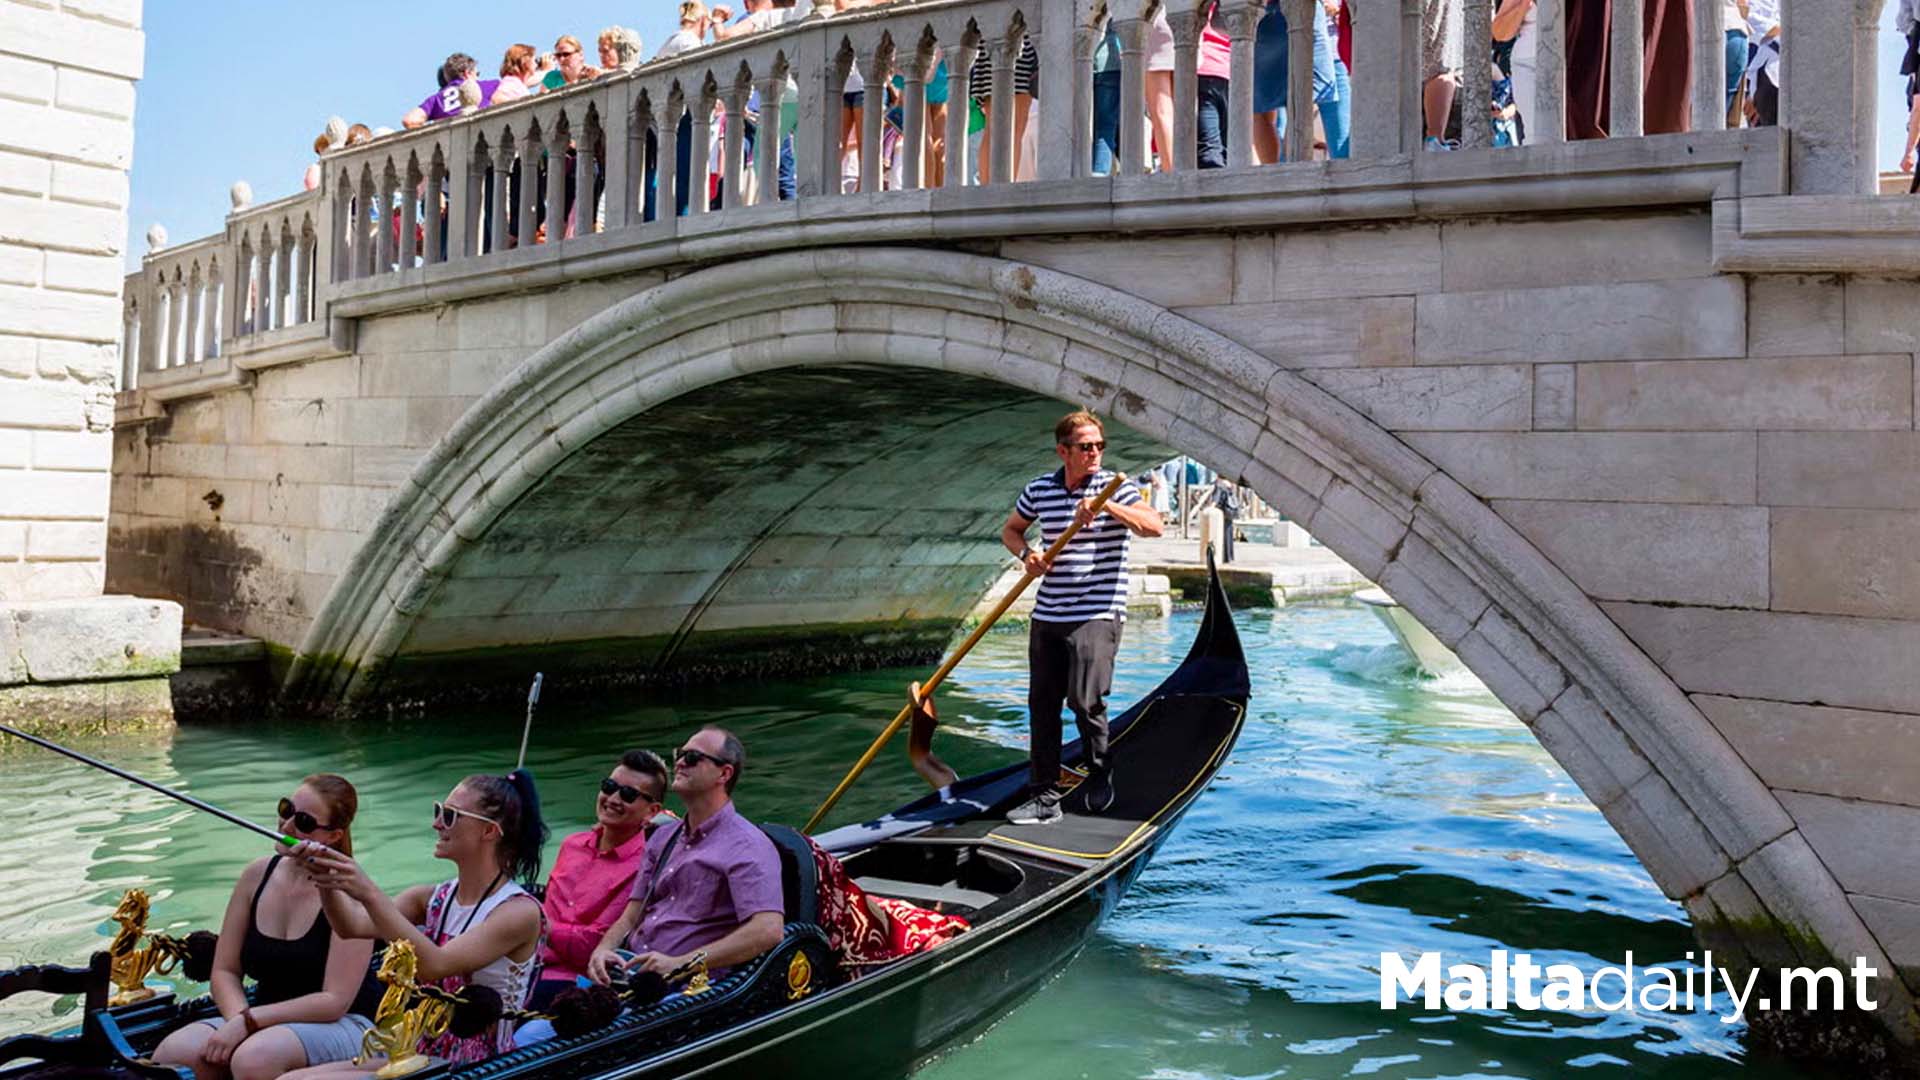 Venice To Ban Loudspeakers: Limit Tourist Groups To 25 People